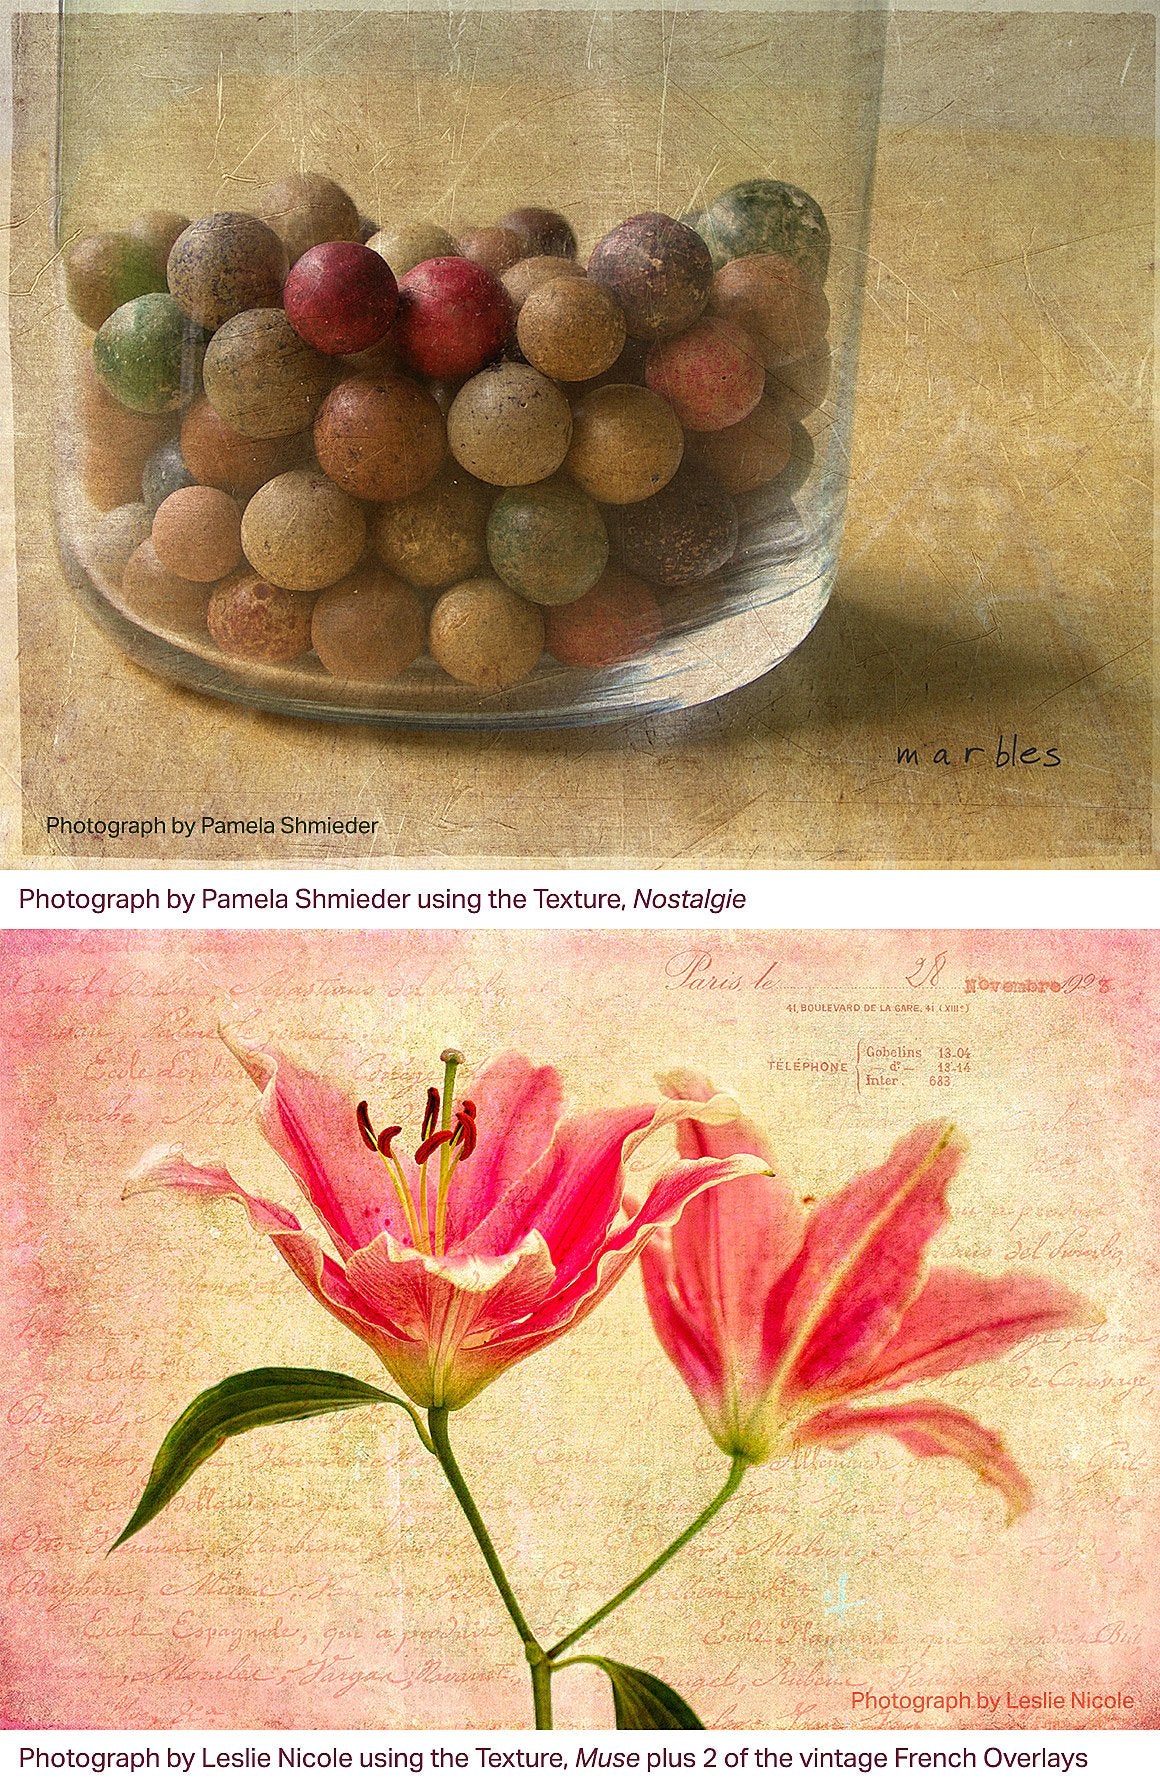 Textured photography examples using the Les Textures 2 Collection. 